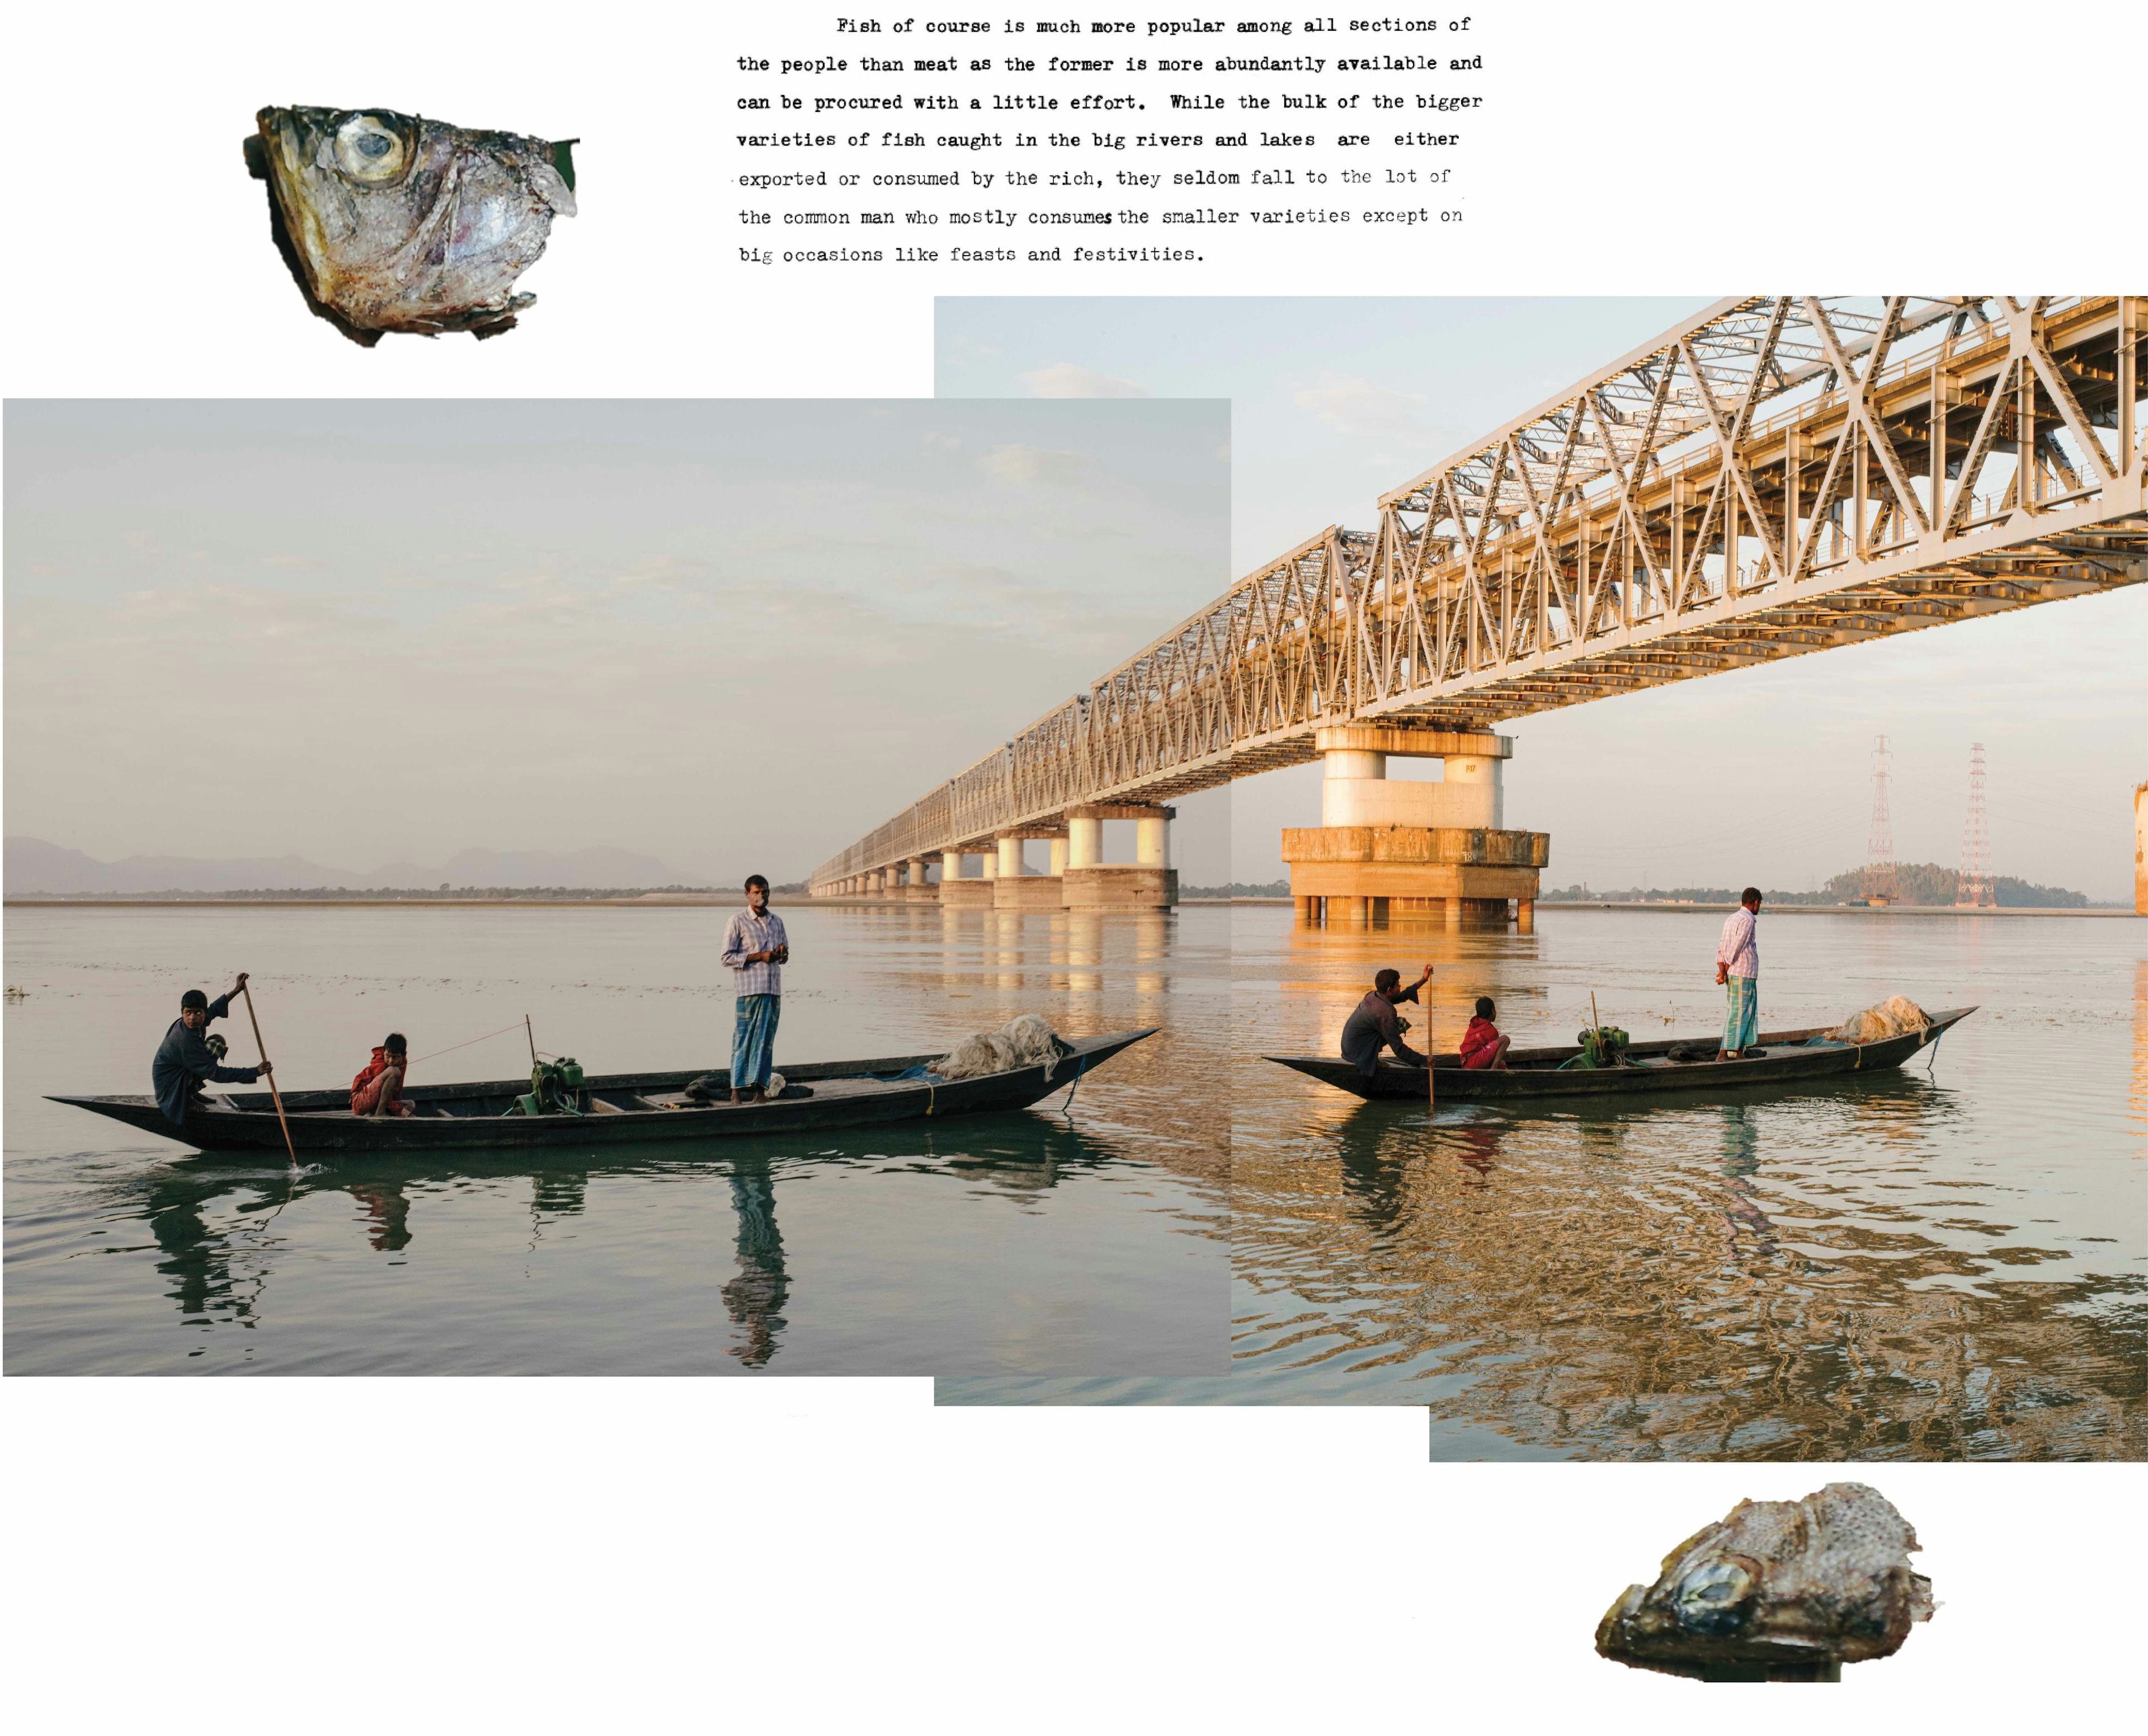 Collage of images showing a river with two boats and a large bridge, text and fish heads. © Akshay Mahajan